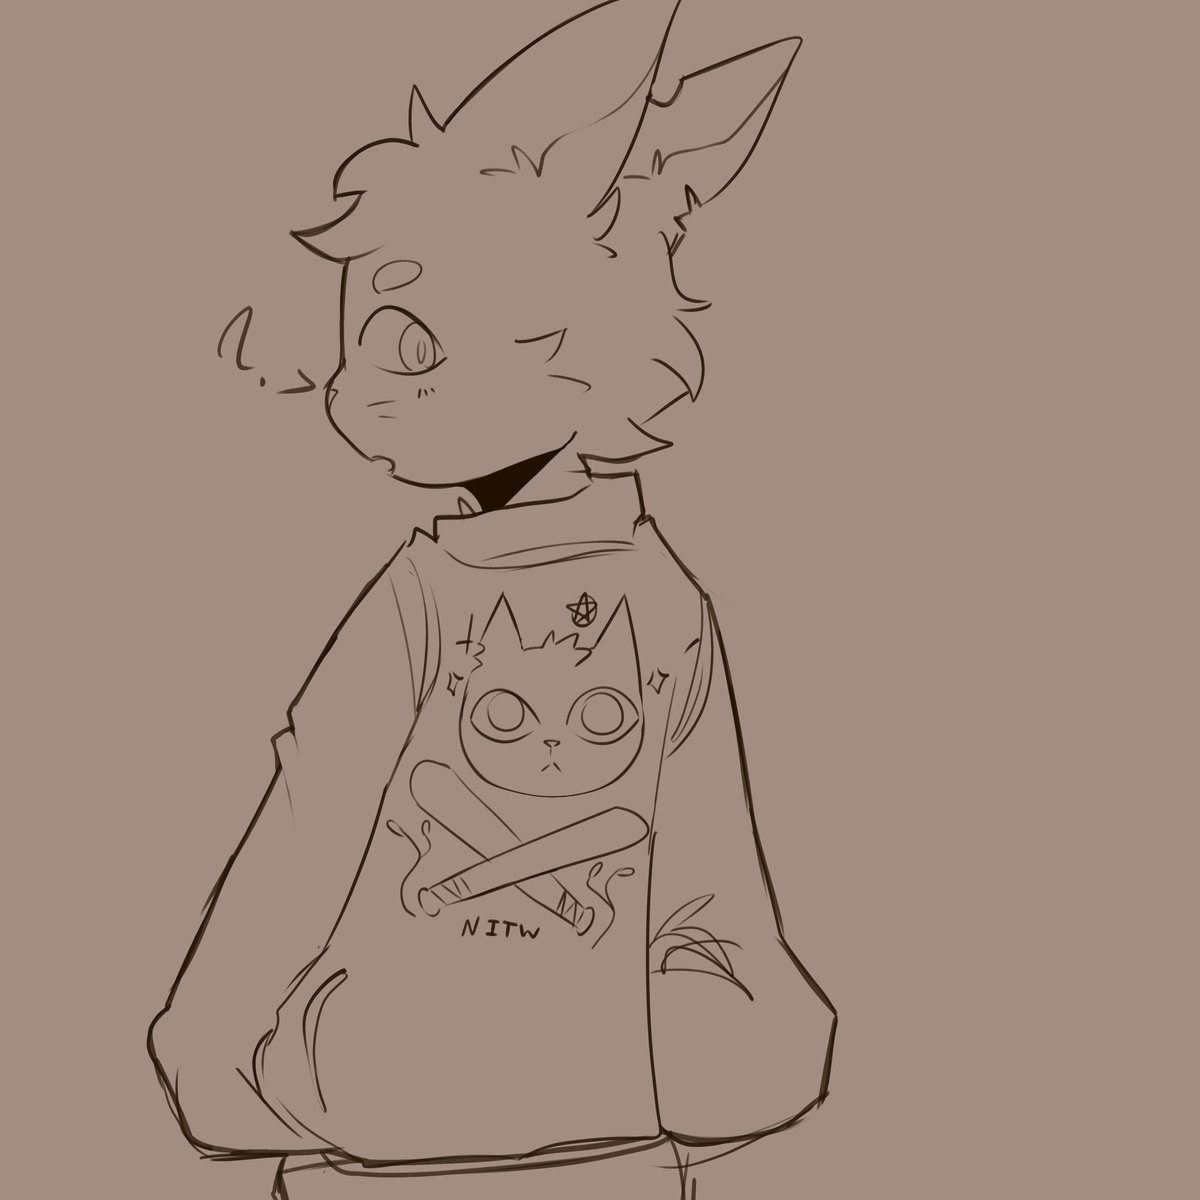 my old NITW jacket drawing